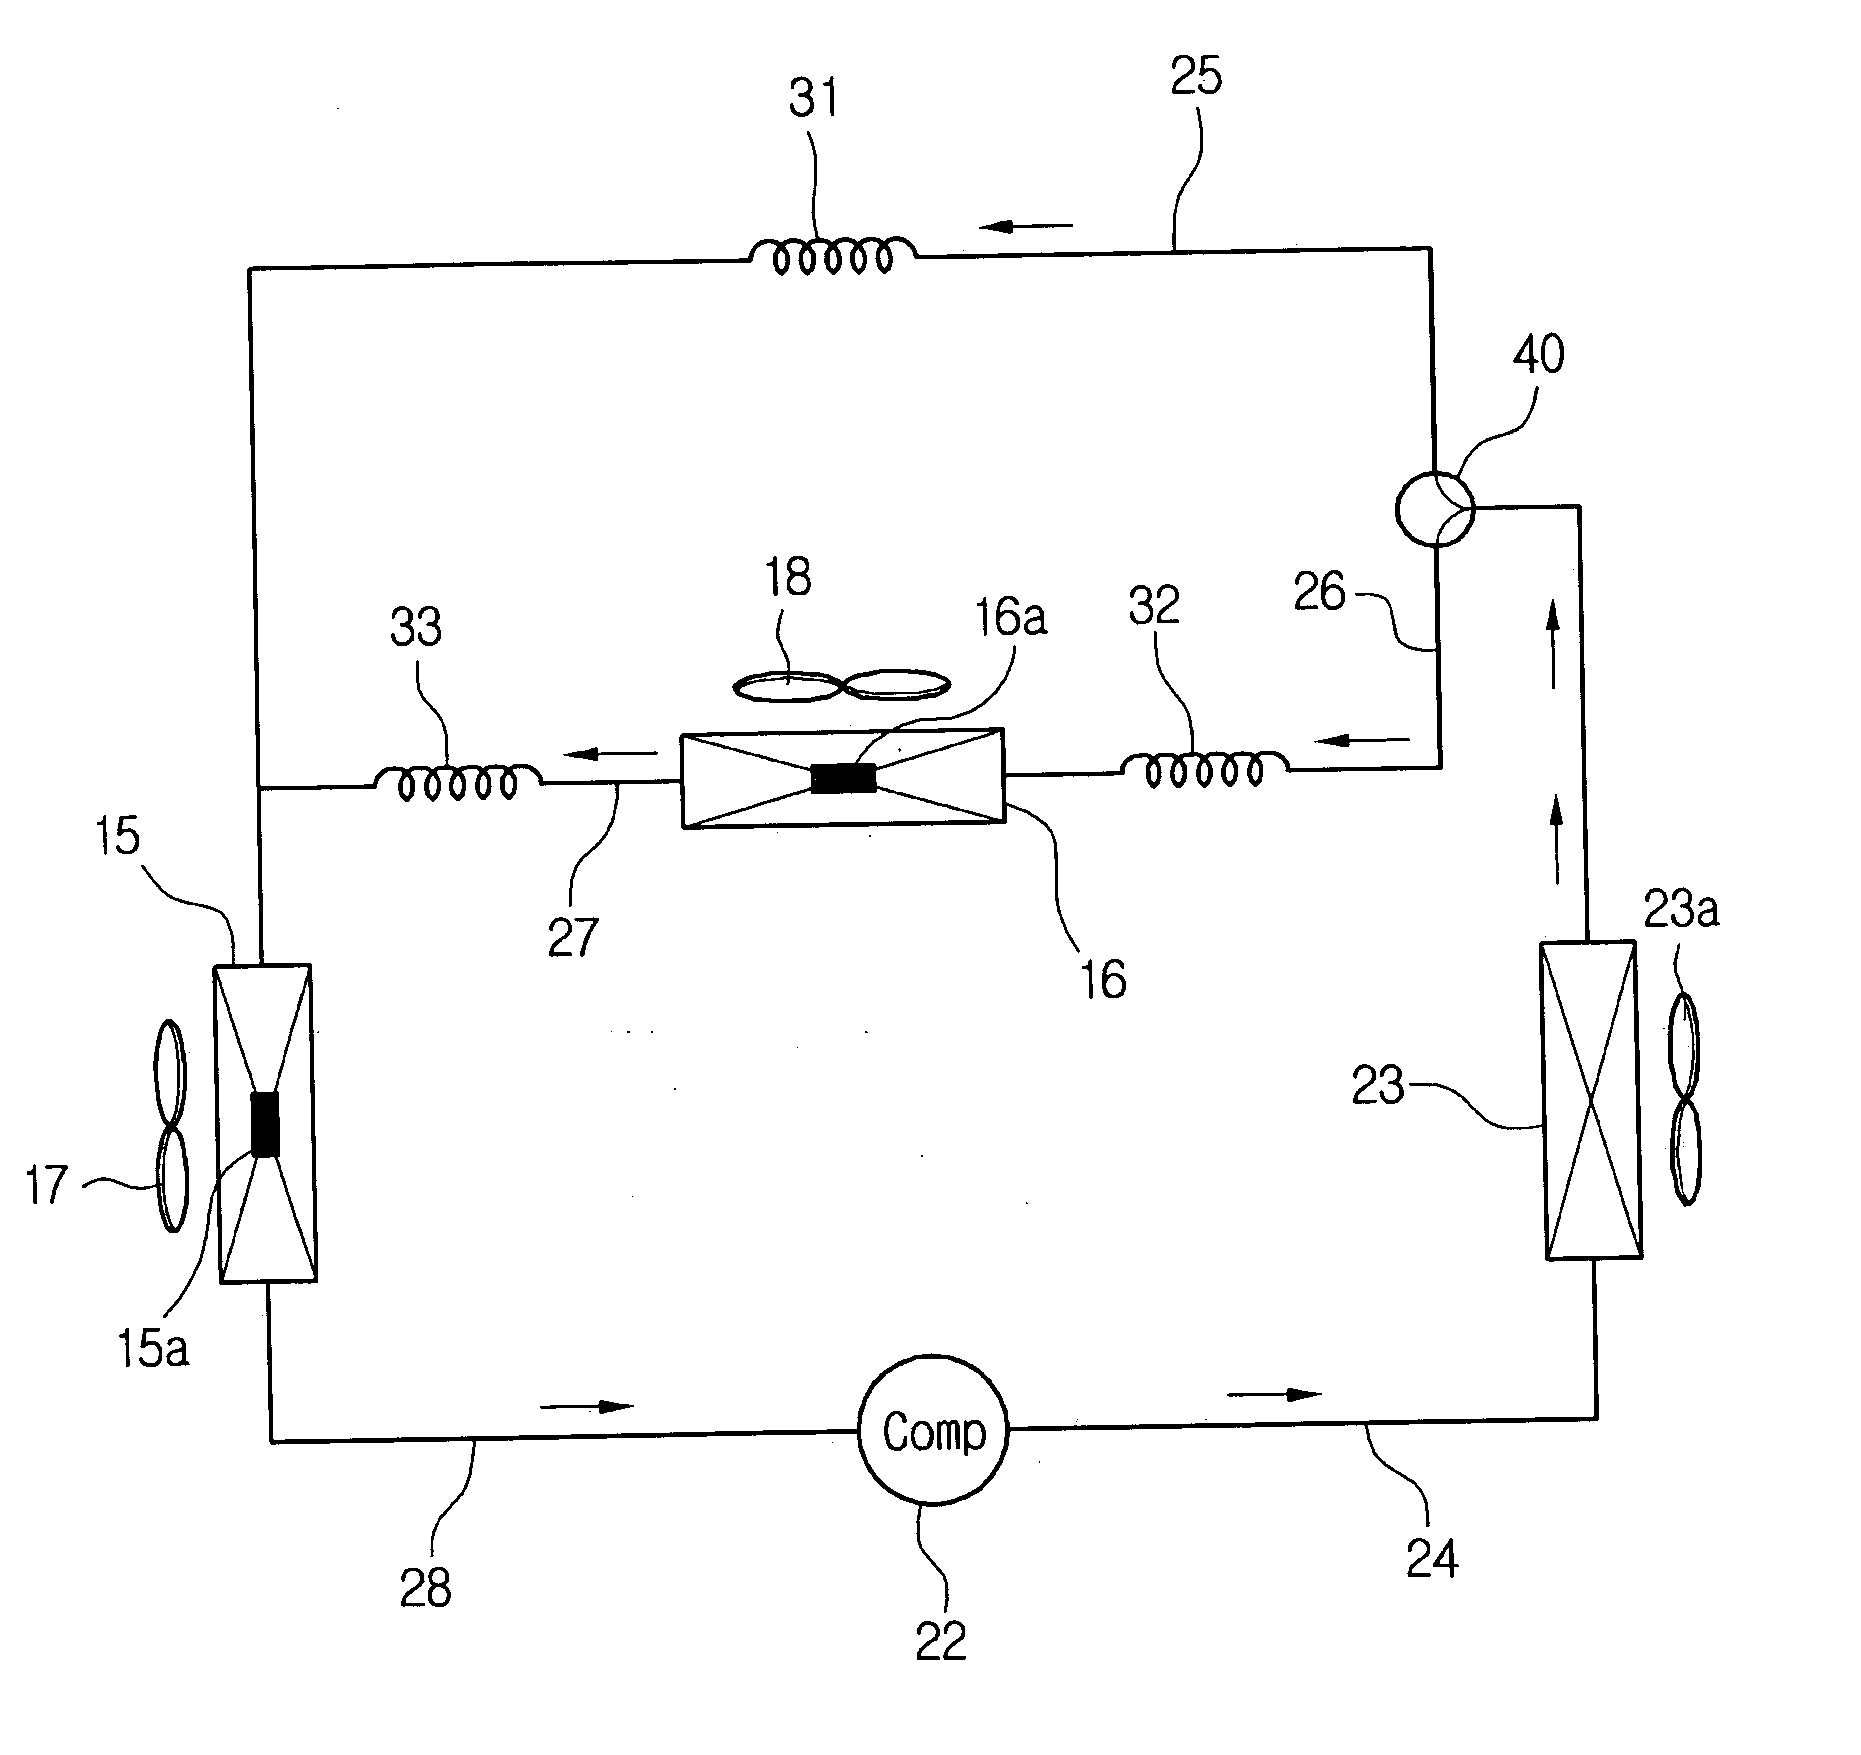 Method for controlling operation of refrigerator